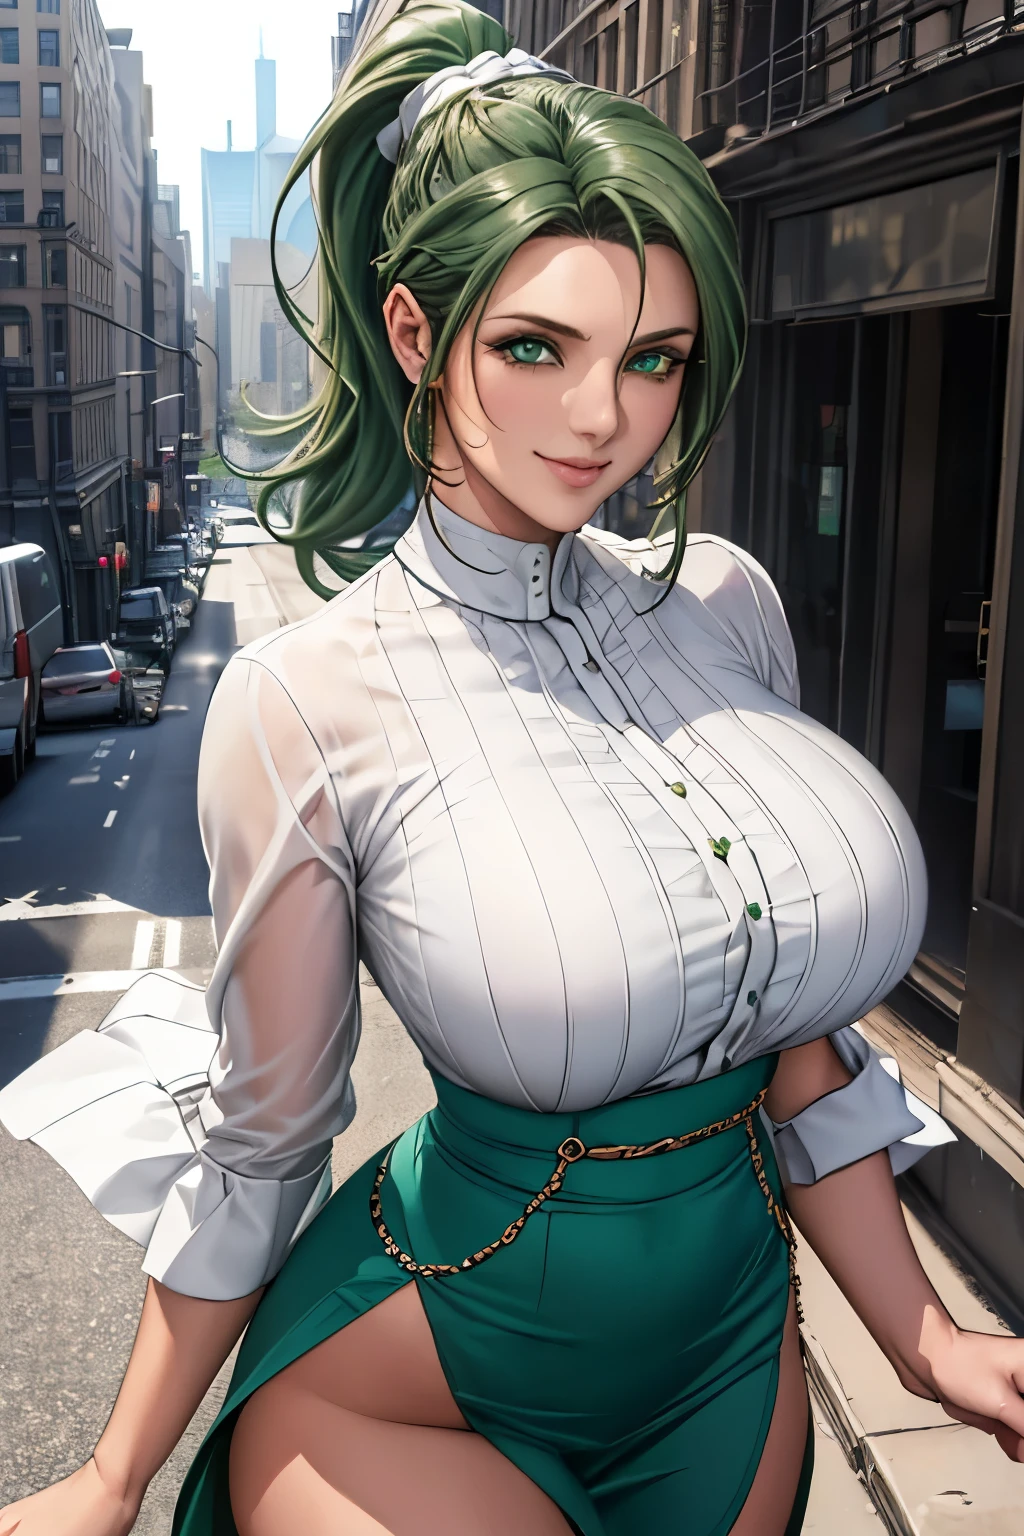 femele((30-years old)),  ((Green eyes)), Clothes((New York Fashion Week, white of light)),  Smiling, Breast Out, Ponytail, Accessories,